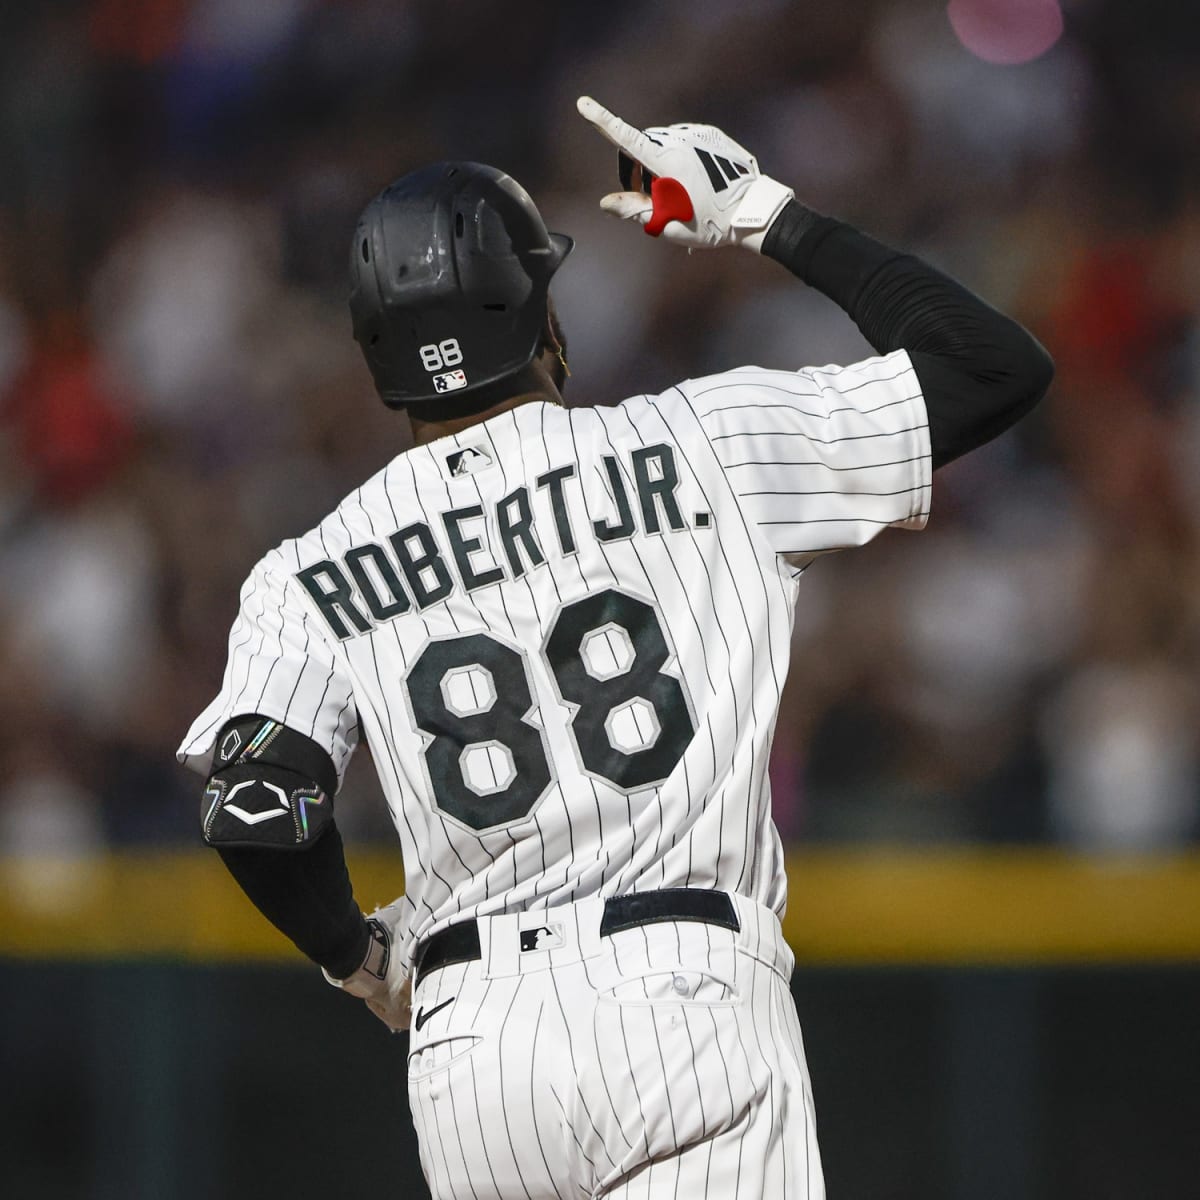 Chicago White Sox Star Luis Robert Jr. Joins the Home Run Derby